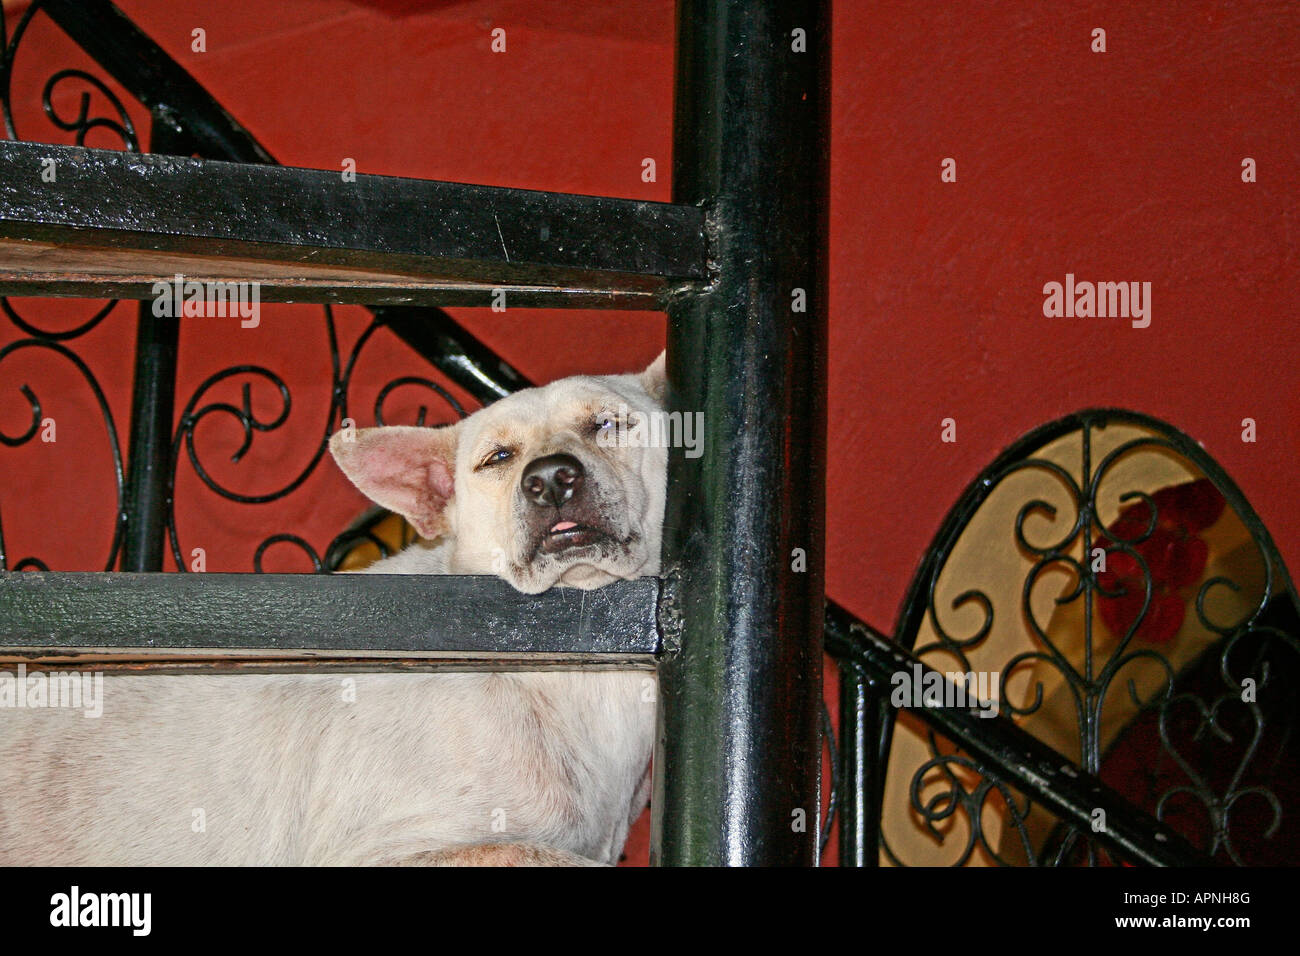 White dog snoozing against a wrought iron spiral staircase red wall Stock Photo